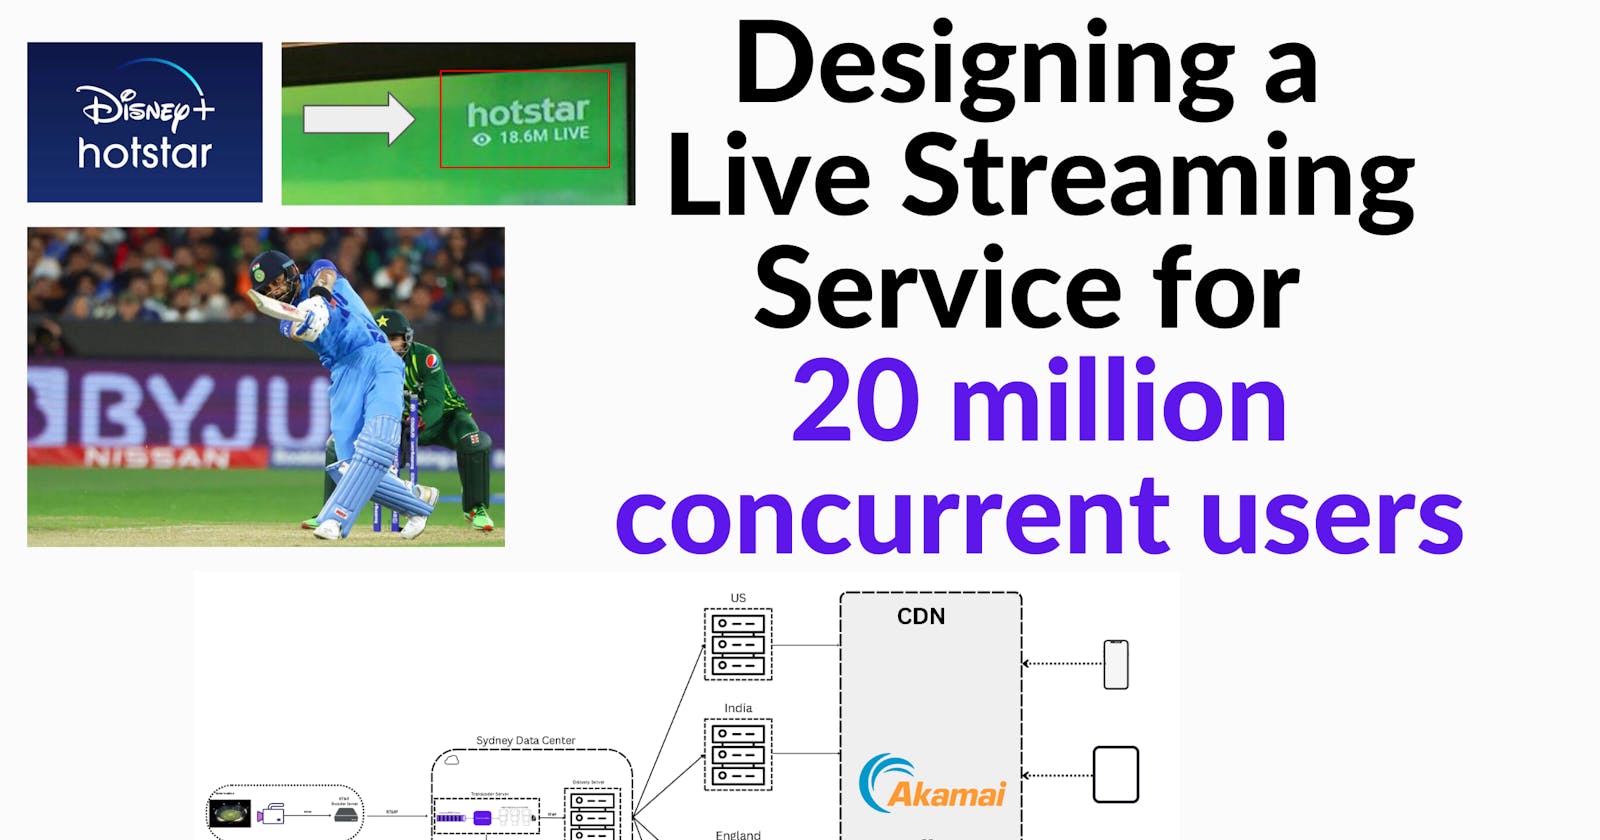 Designing a Live Streaming Service for 20 million concurrent users